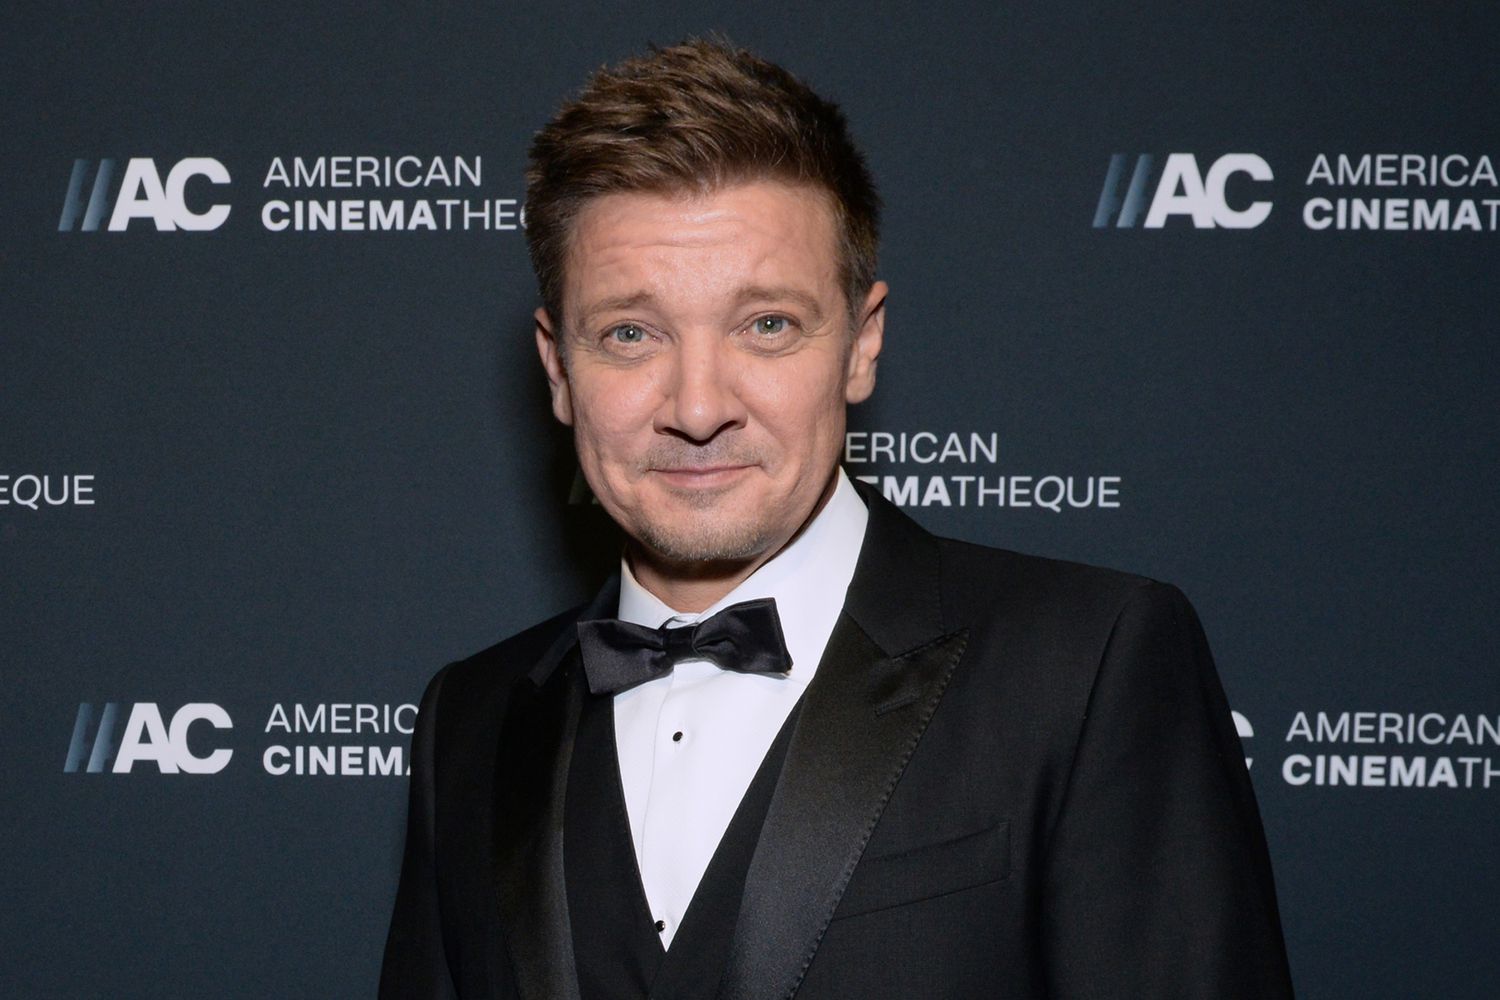 Jeremy Renner attends the 35th Annual American Cinematheque Awards Honoring Scarlett Johansson at The Beverly Hilton on November 18, 2021 in Beverly Hills, California.